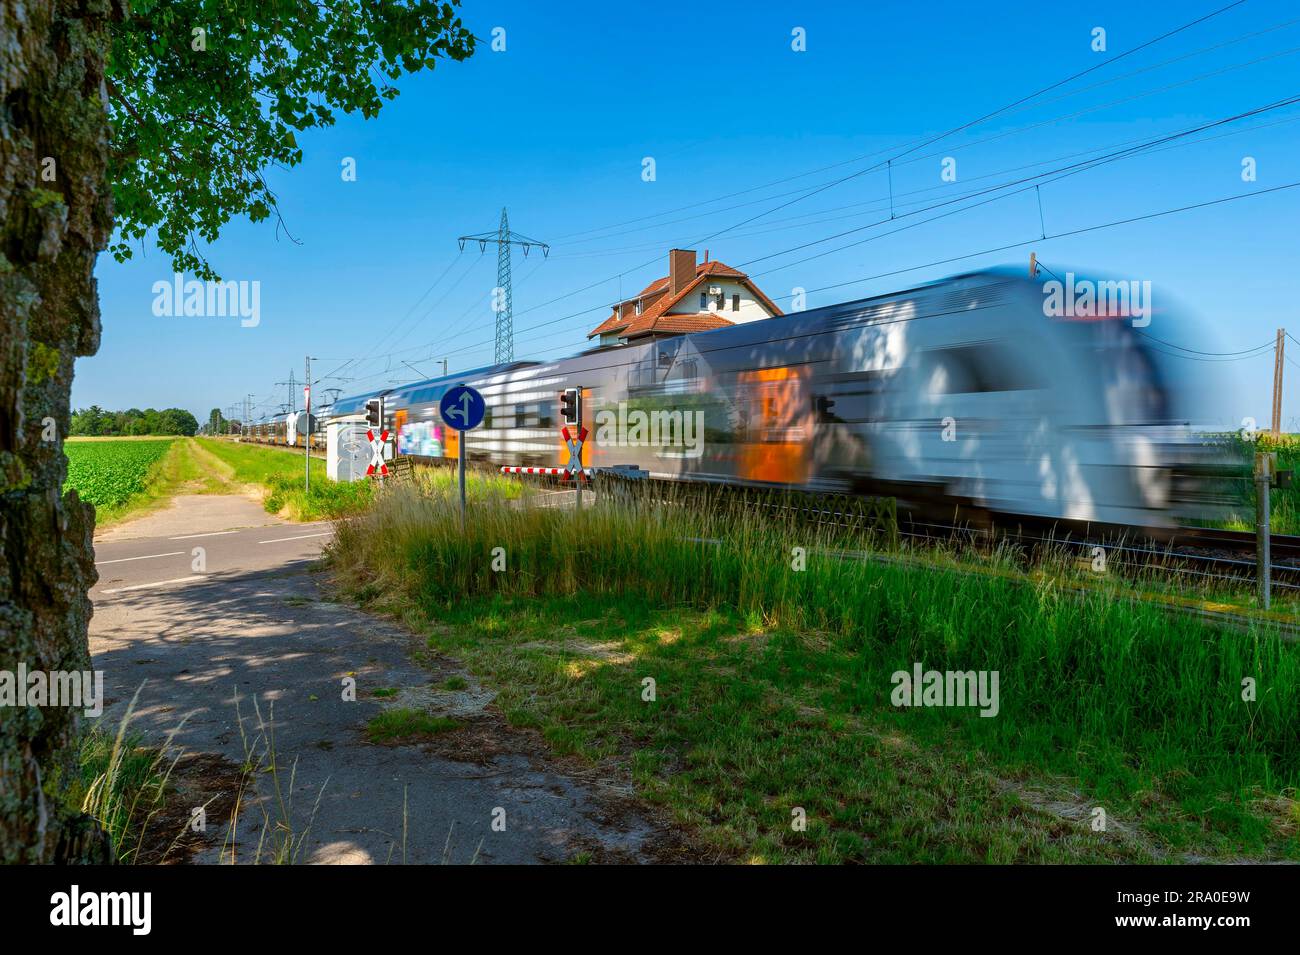 Fast train, in motion, motion blur, passed, level crossing, Germany, North Rhine-Westphalia, Beckrath Stock Photo